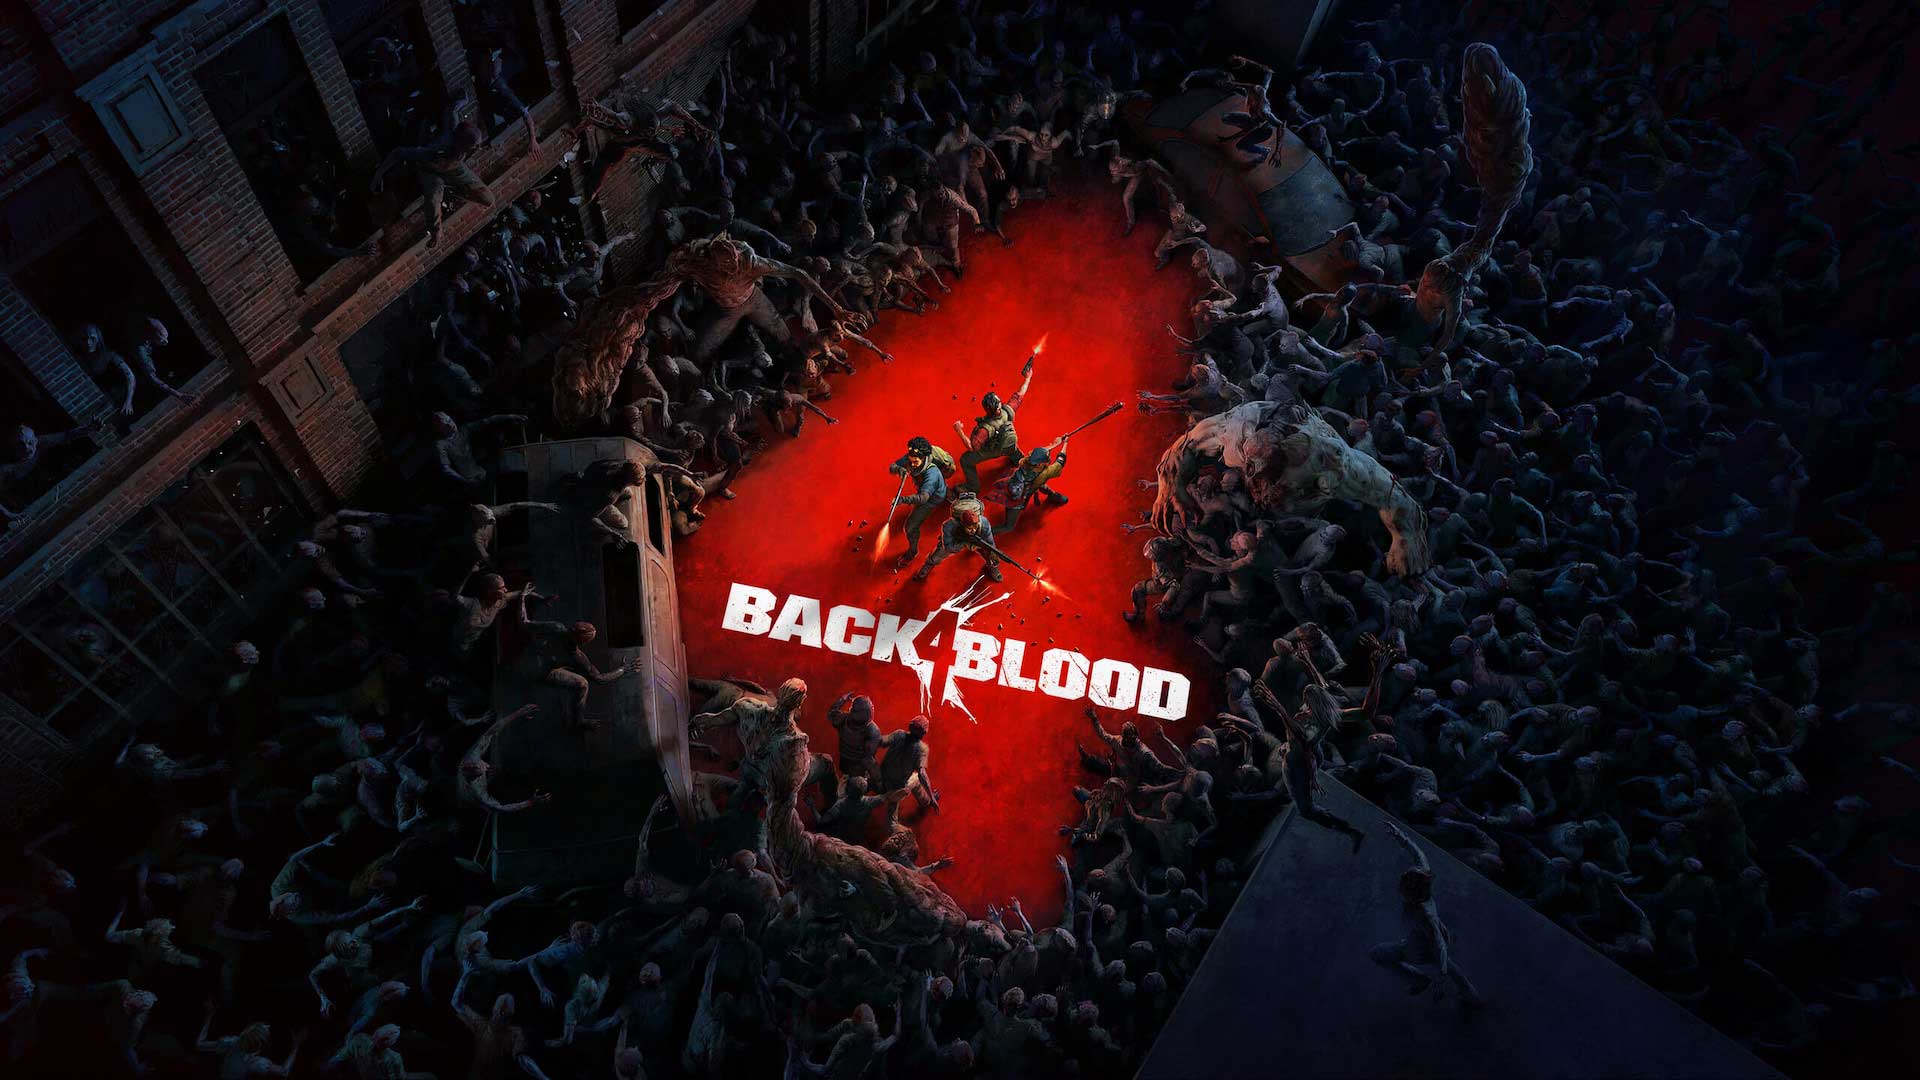 Claim Your Back 4 Blood Beta Code Here Before They Run Out